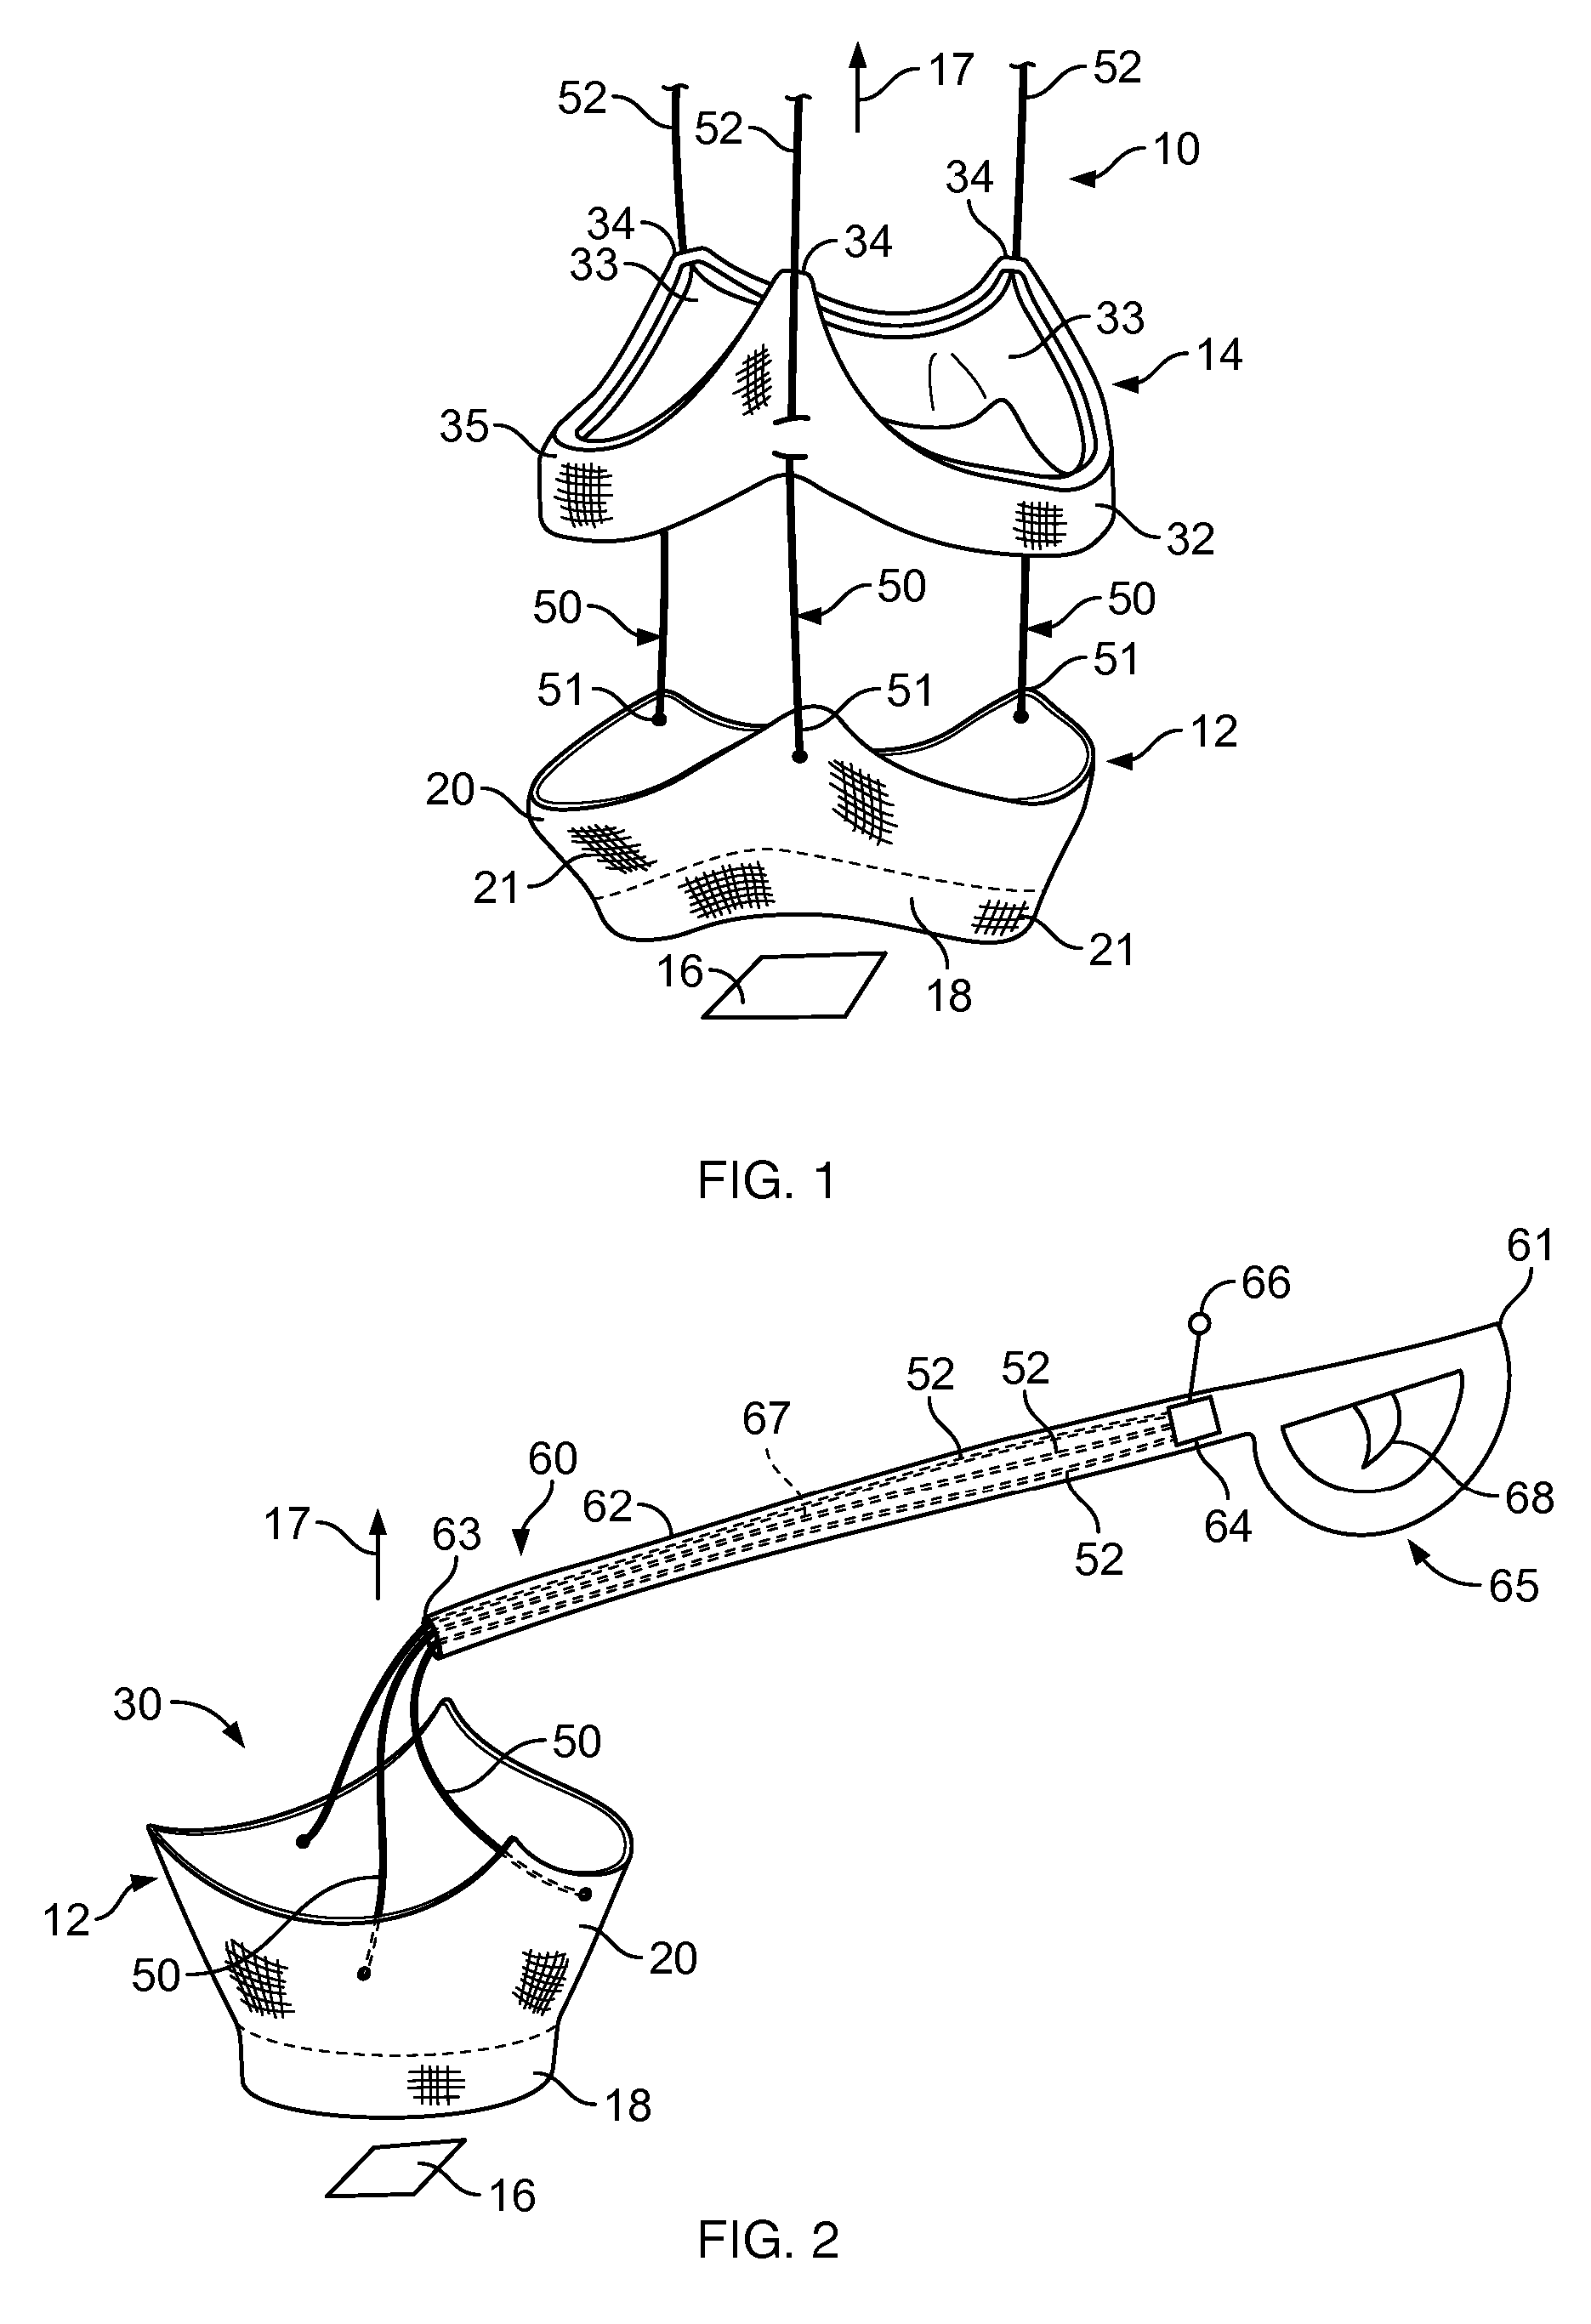 Multiple component prosthetic heart valve assemblies and methods for delivering them